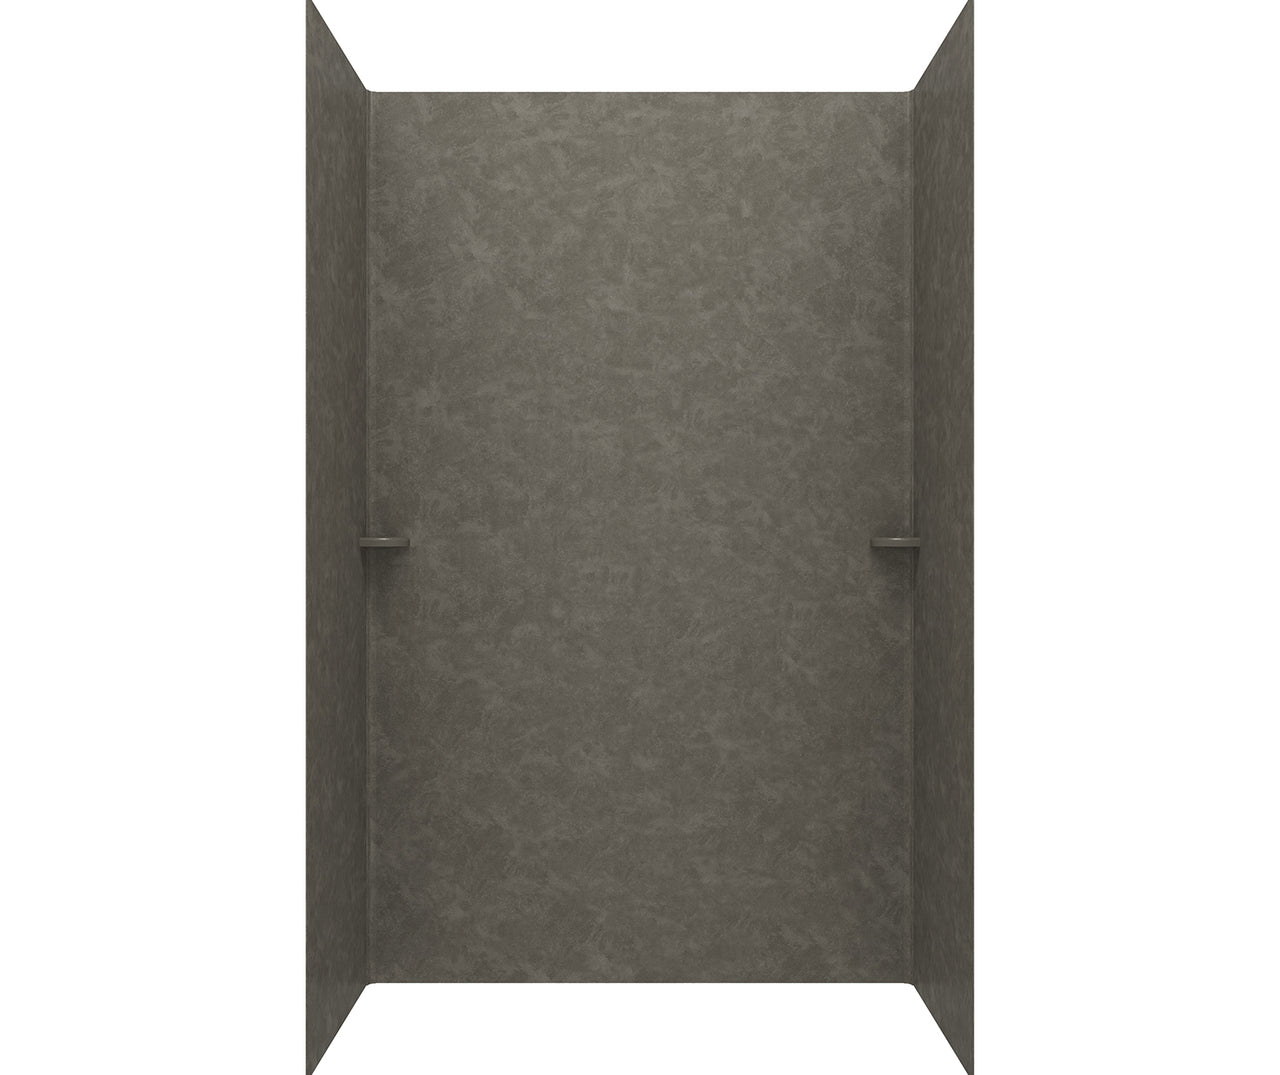 SS-60-3 30 x 60 x 60 Swanstone Smooth Glue up Tub Wall Kit in Charcoal Gray -BNGBath.com